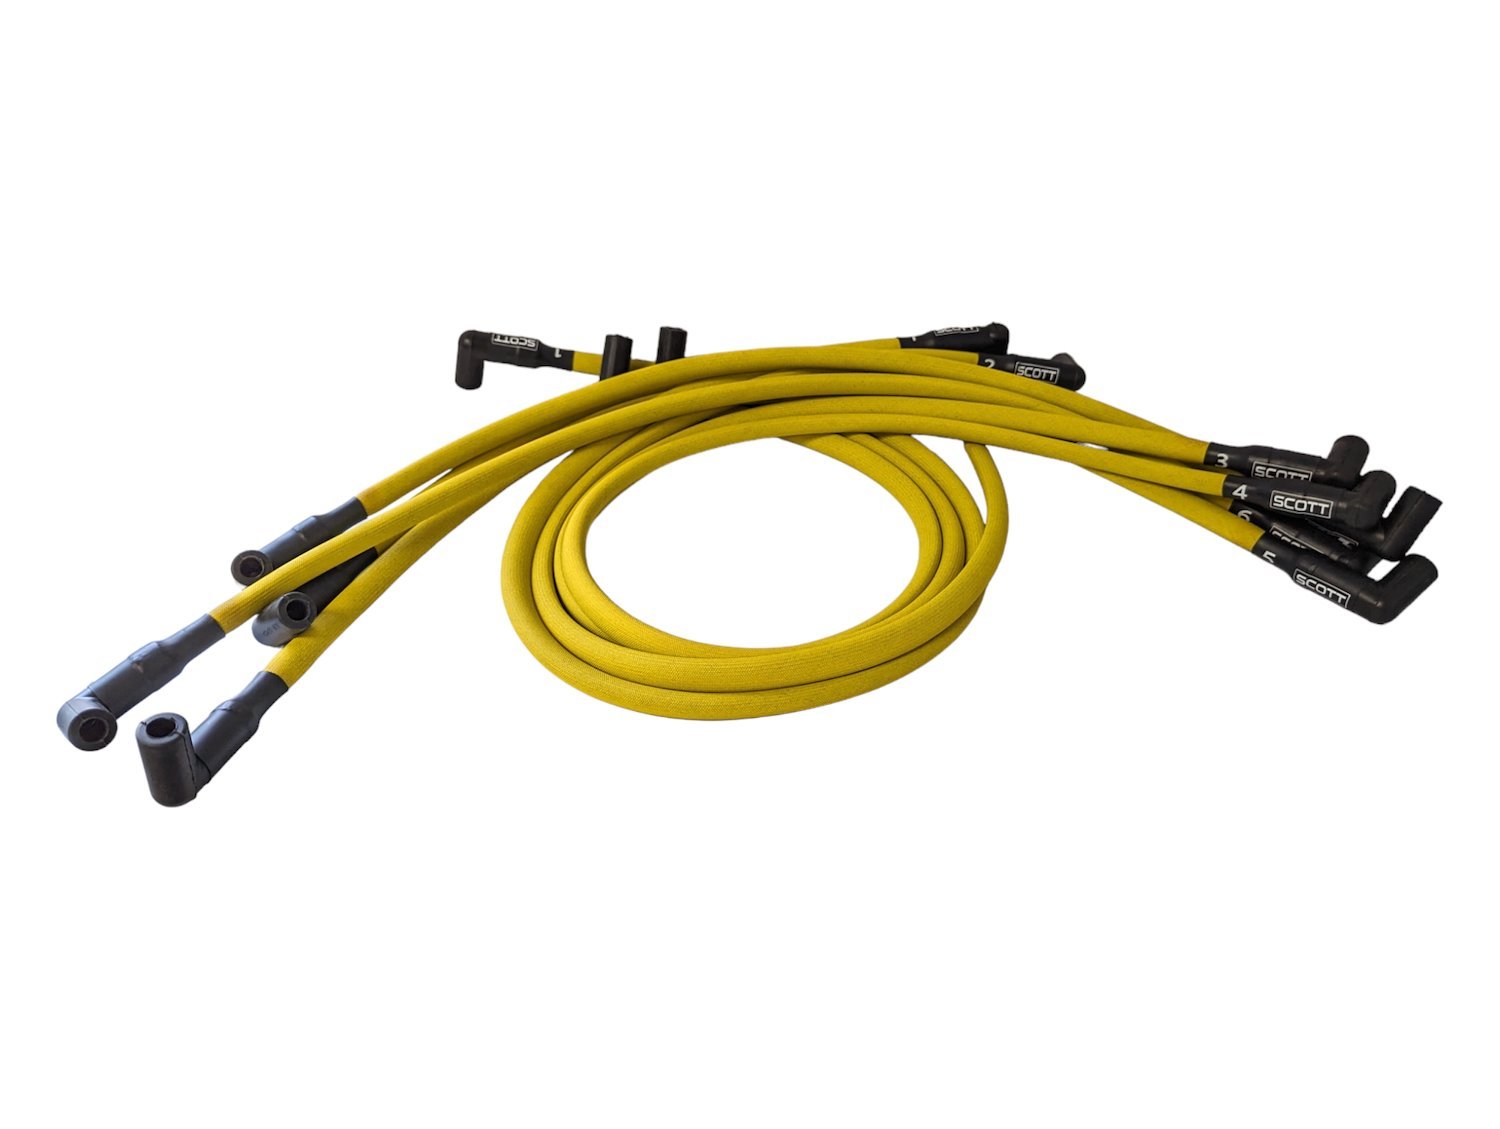 SPW300-PS-530-5 Super Mag Fiberglass-Oversleeved Spark Plug Wire Set for Big Block Ford Dragster, Under Header [Yellow]